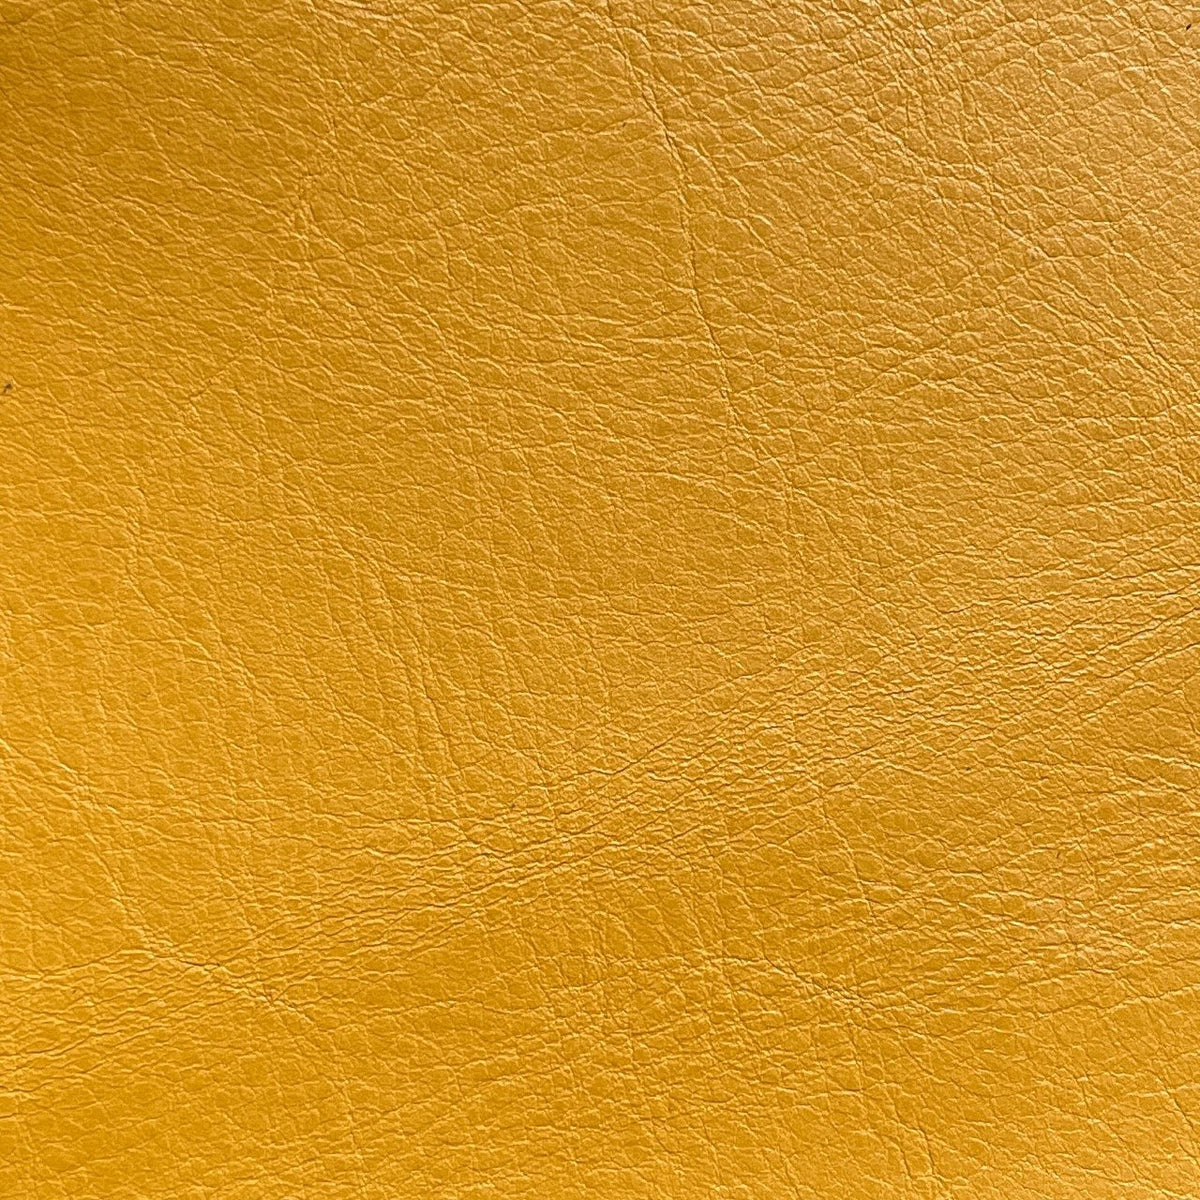 Olympia Cow Half Sides | Ochre | 1.5 mm | 10.5 sq.ft | From $160 ea.